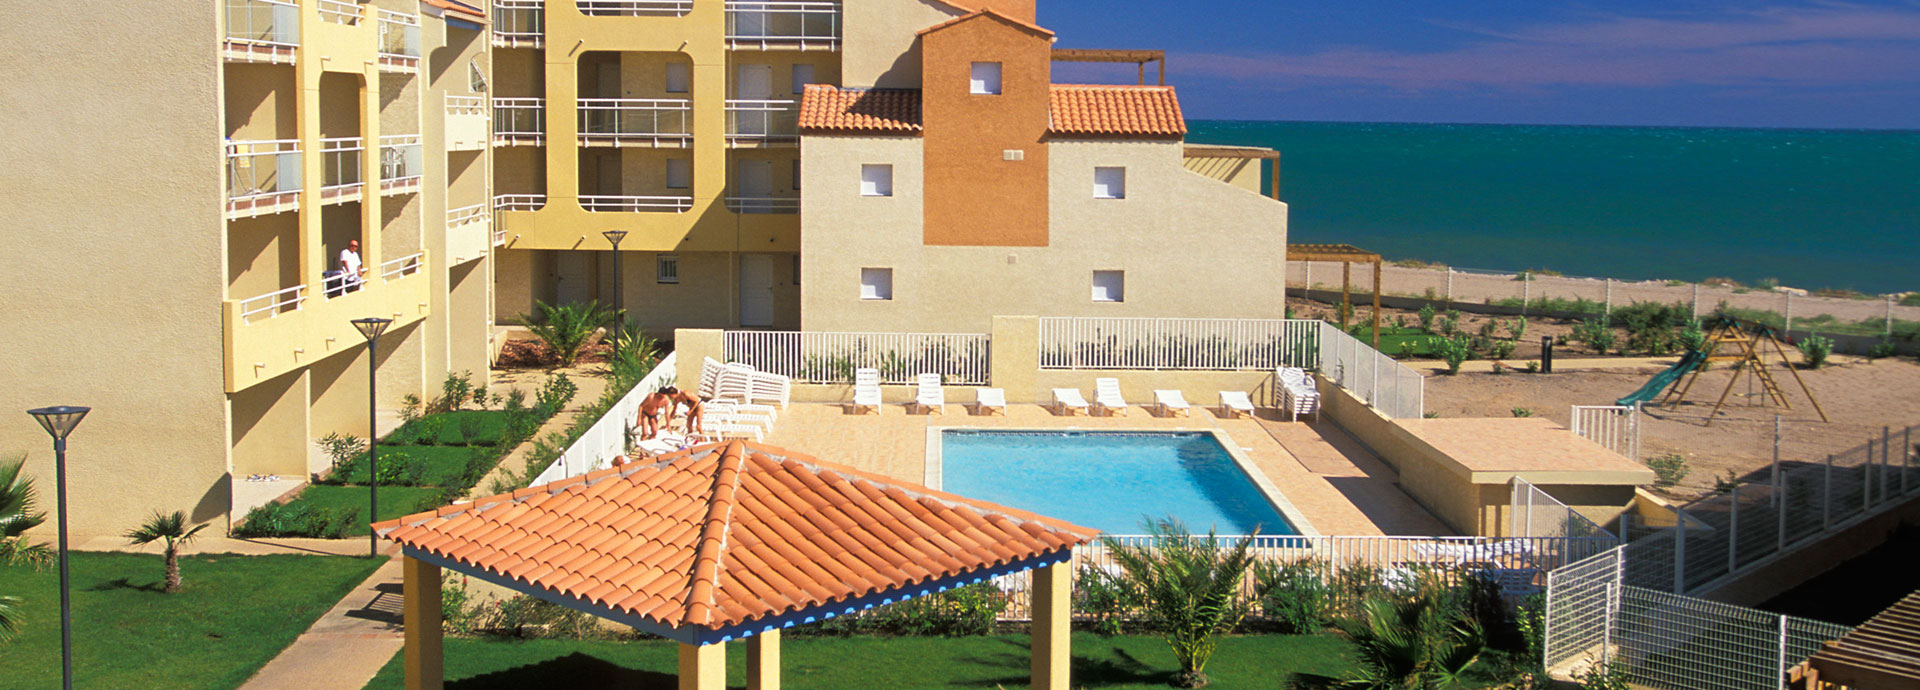 Holiday rental at Valras : Alizea Beach residence